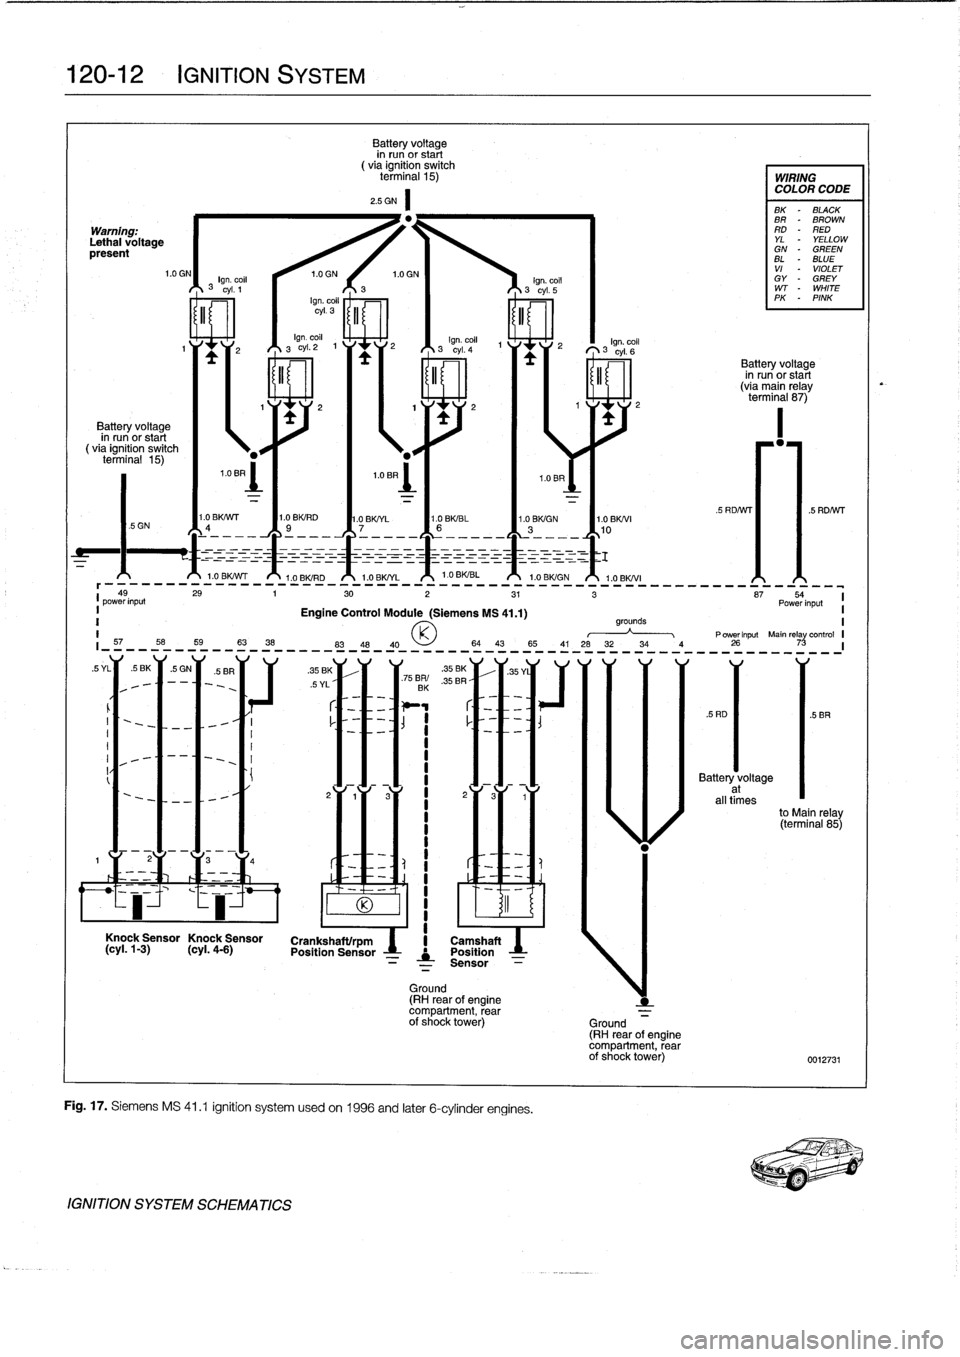 BMW 323i 1995 E36 Service Manual 
120-12

	

IGNITION
SYSTEM

Warning
.
Lethal
voltagepresent

Battery
voltage
in
run
or
start
(via
ignitíon
switch
terminal
15)

I
t

IGNITION
SYSTEM
SCHEMATICS

Battery
voltage
in
run
or
start
(
via